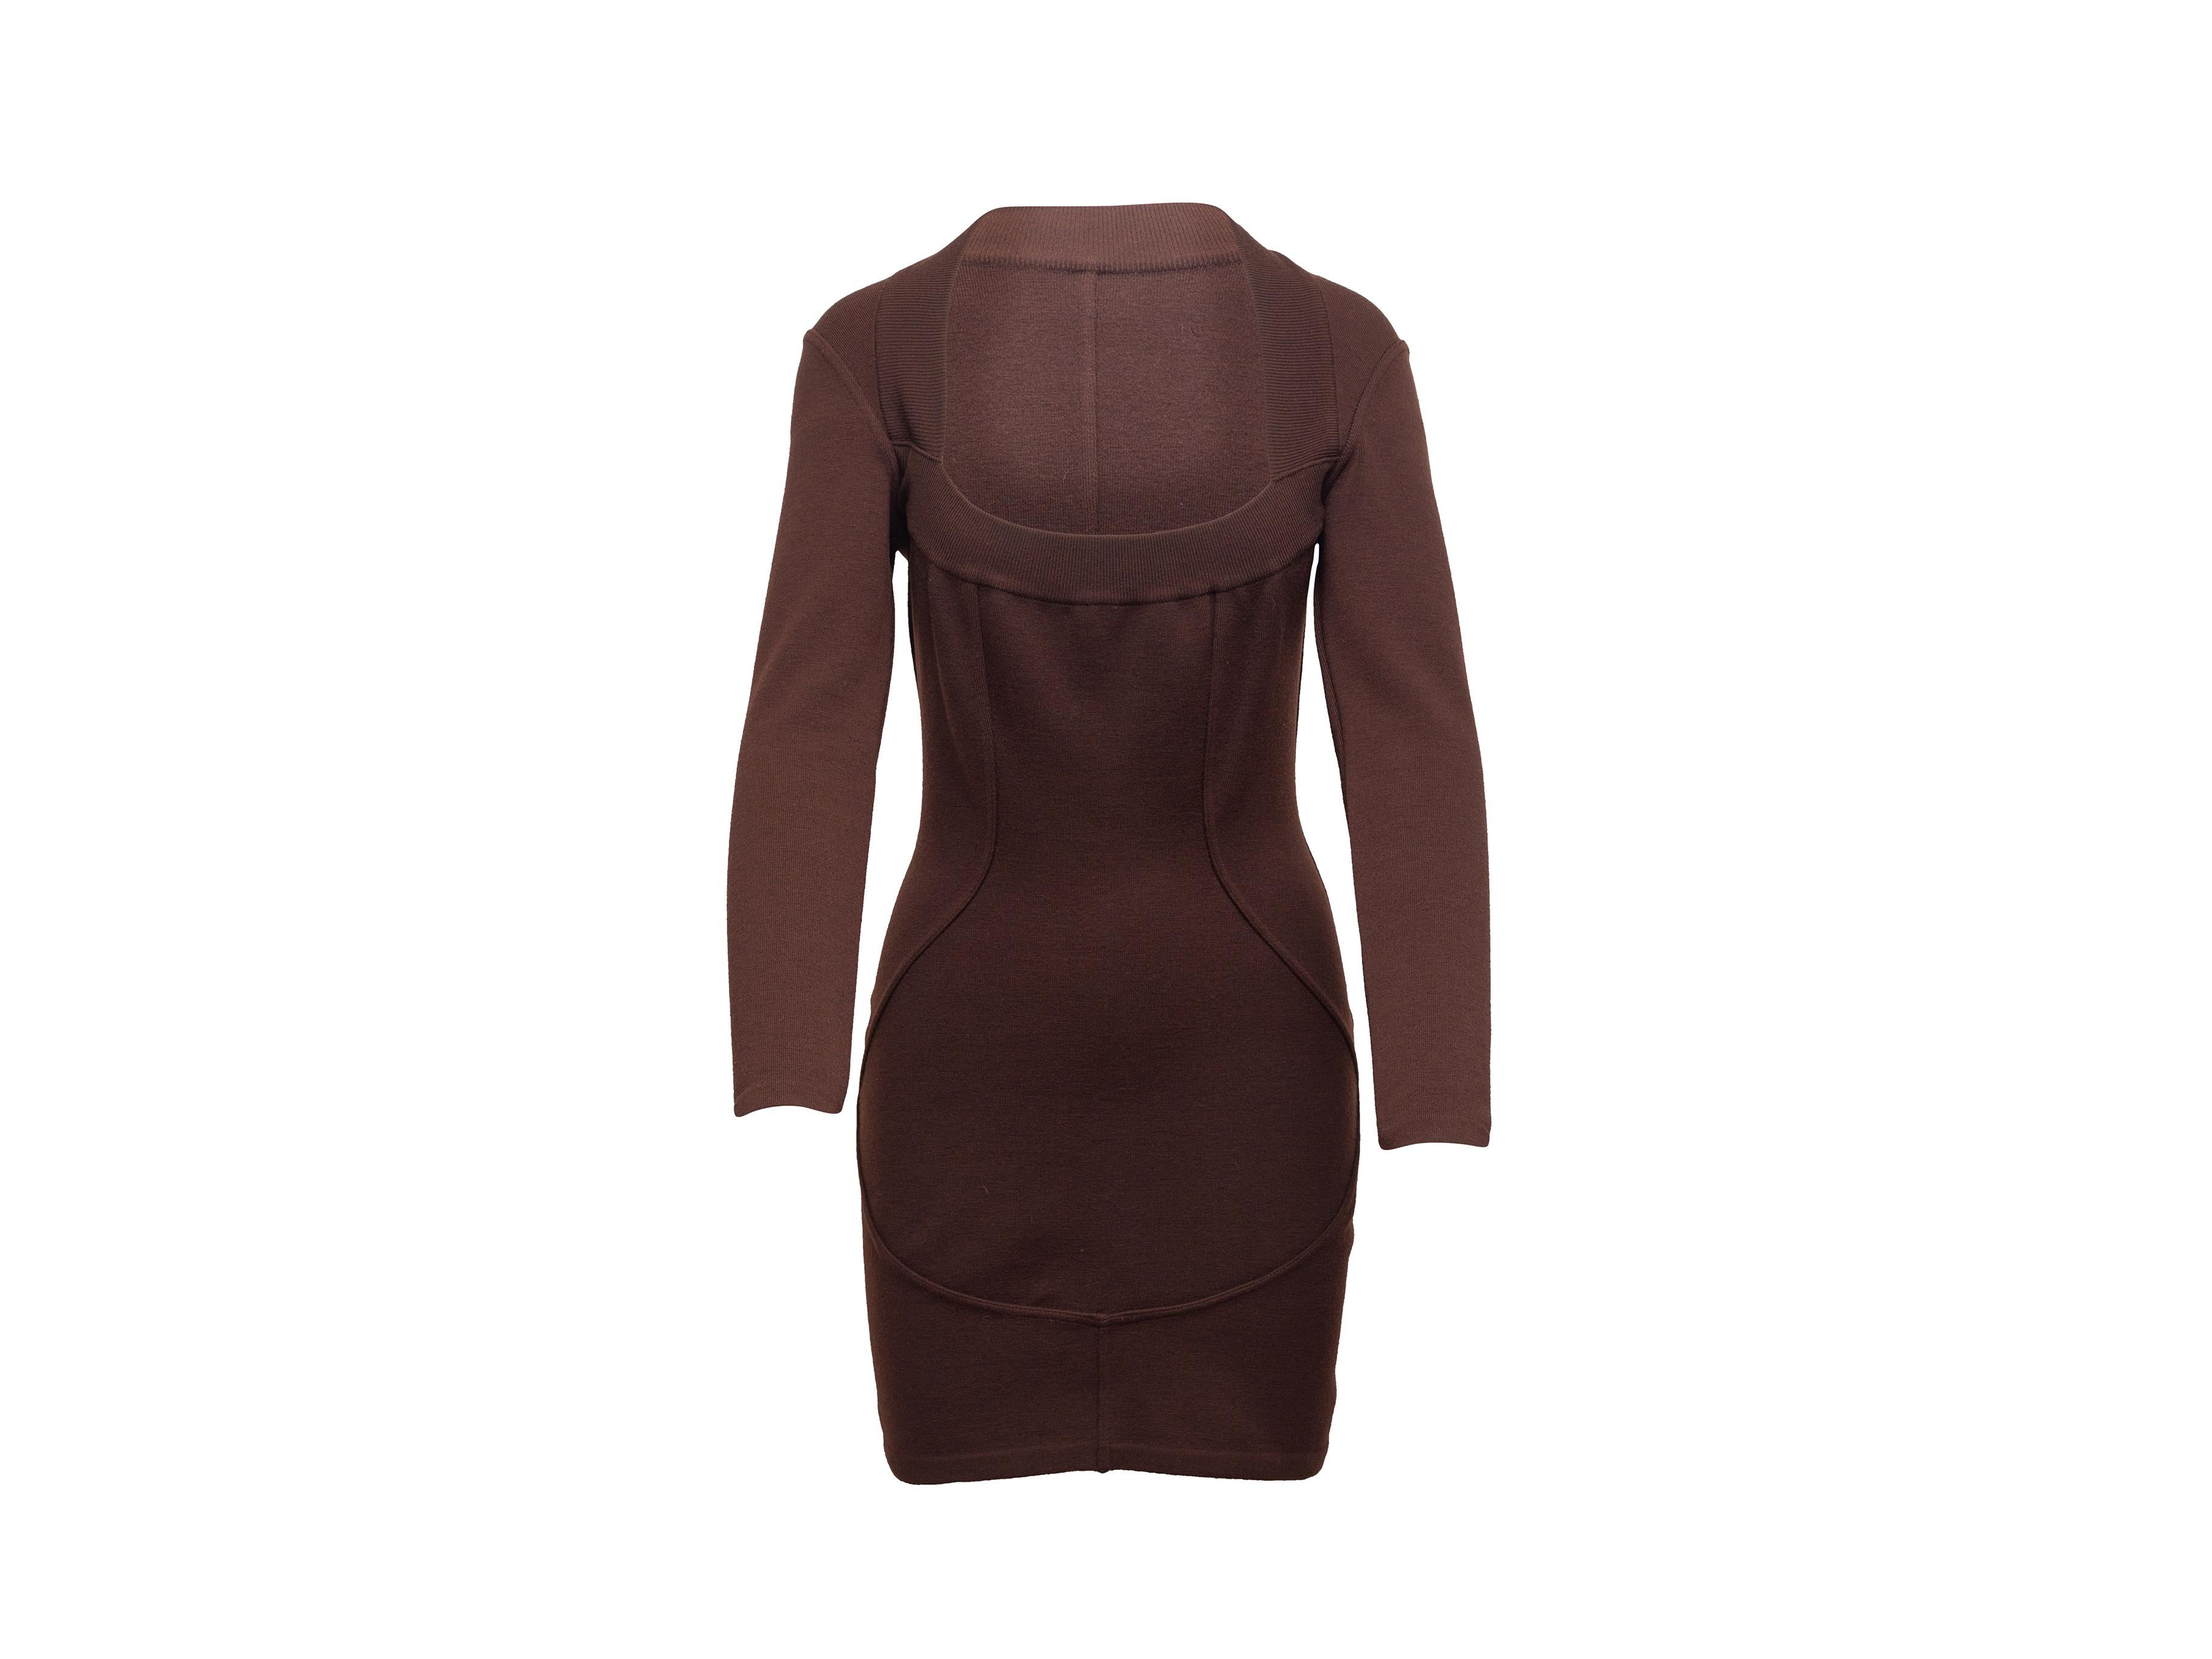 Product details: Vintage brown wool knit bodycon mini dress by Alaia. Scoop neckline. Long sleeves. 30